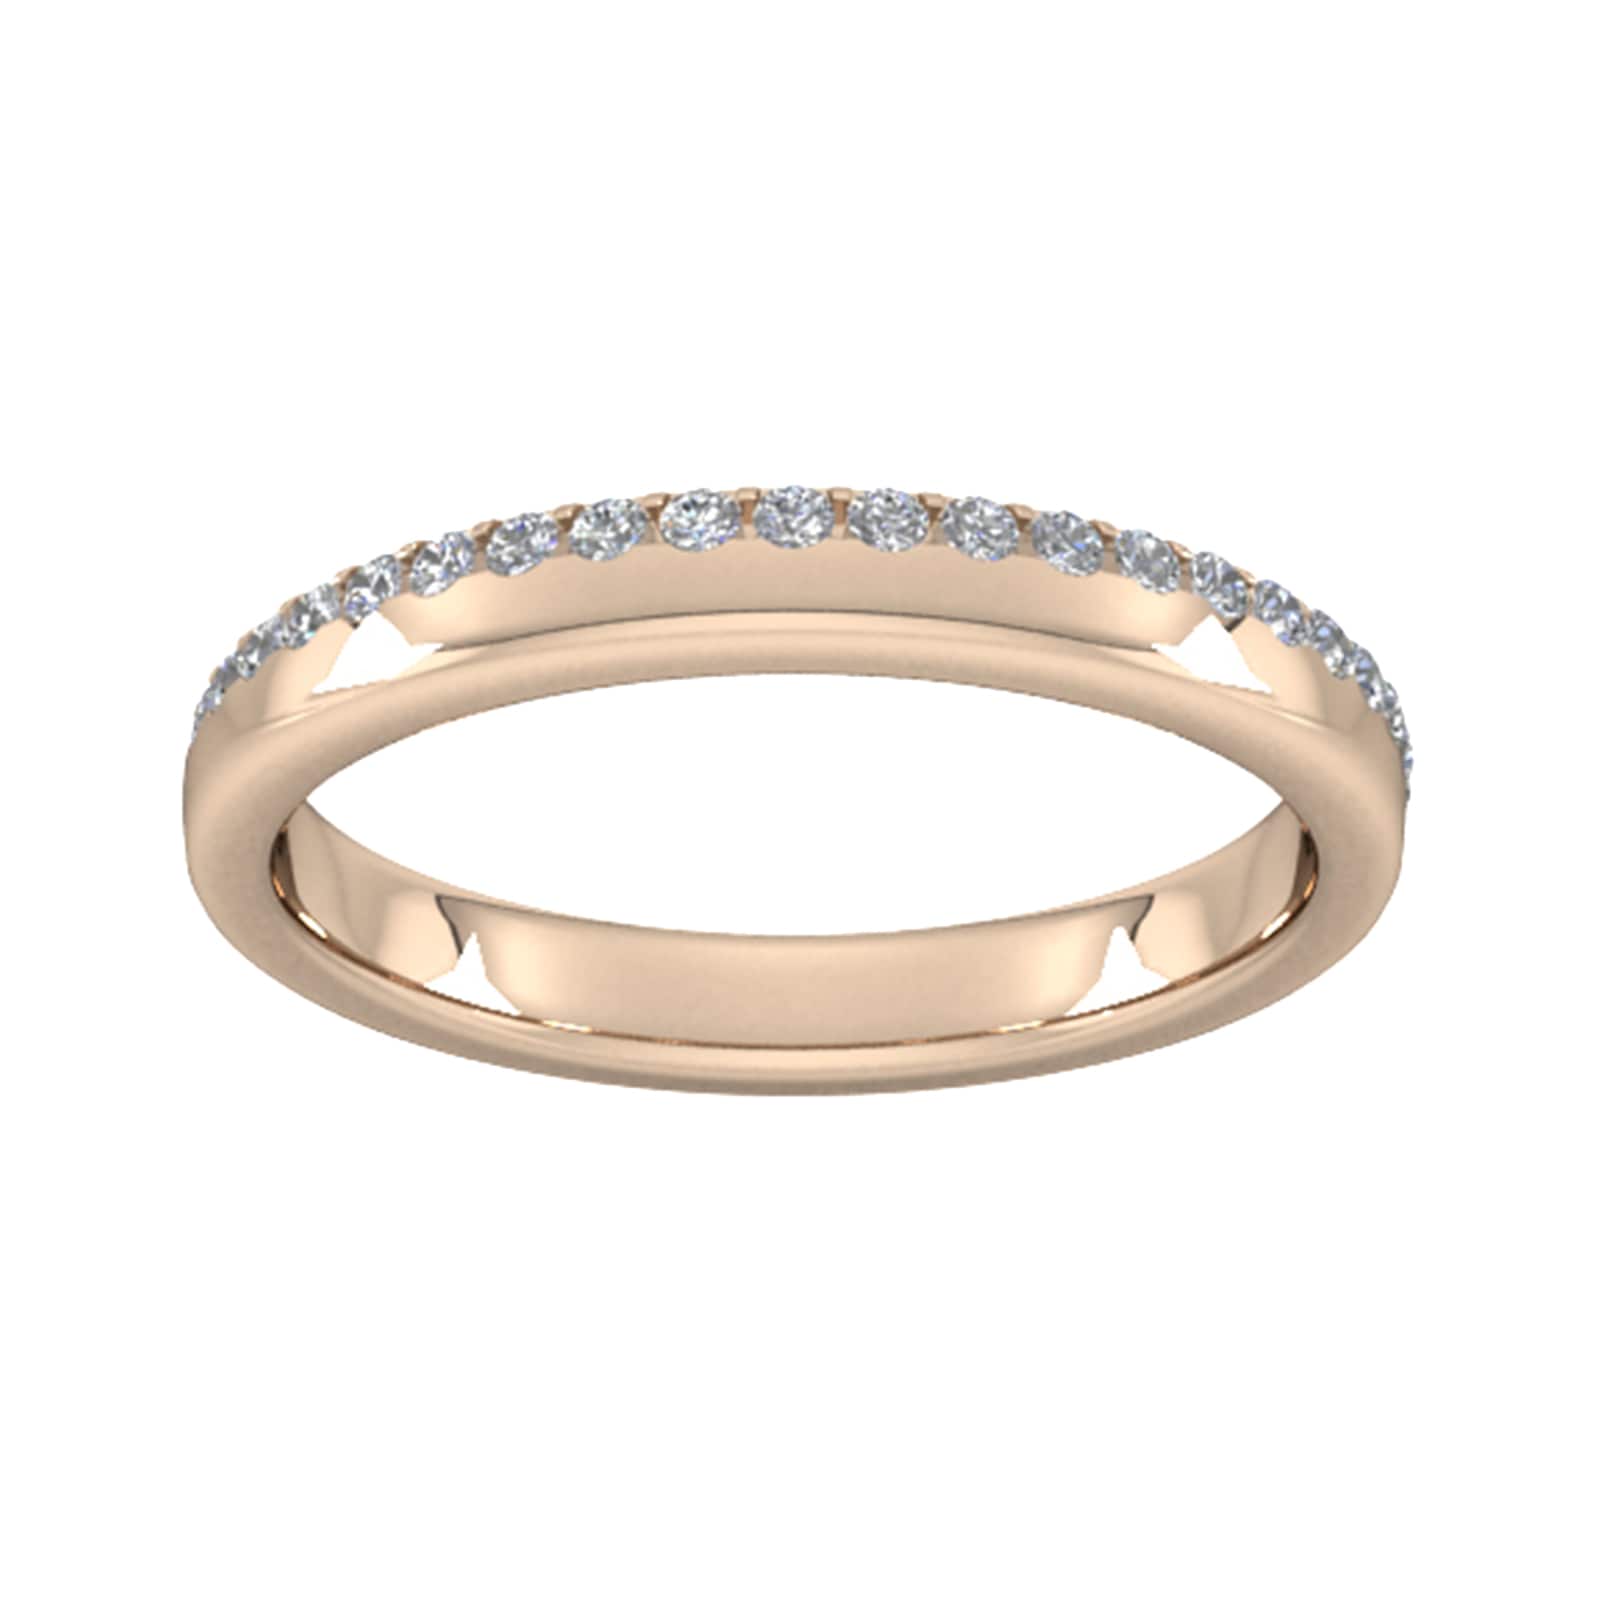 0.42 Carat Total Weight Brilliant Cut Wave Claw Set Diamond Wedding Ring In 9 Carat Rose Gold - Ring Size X